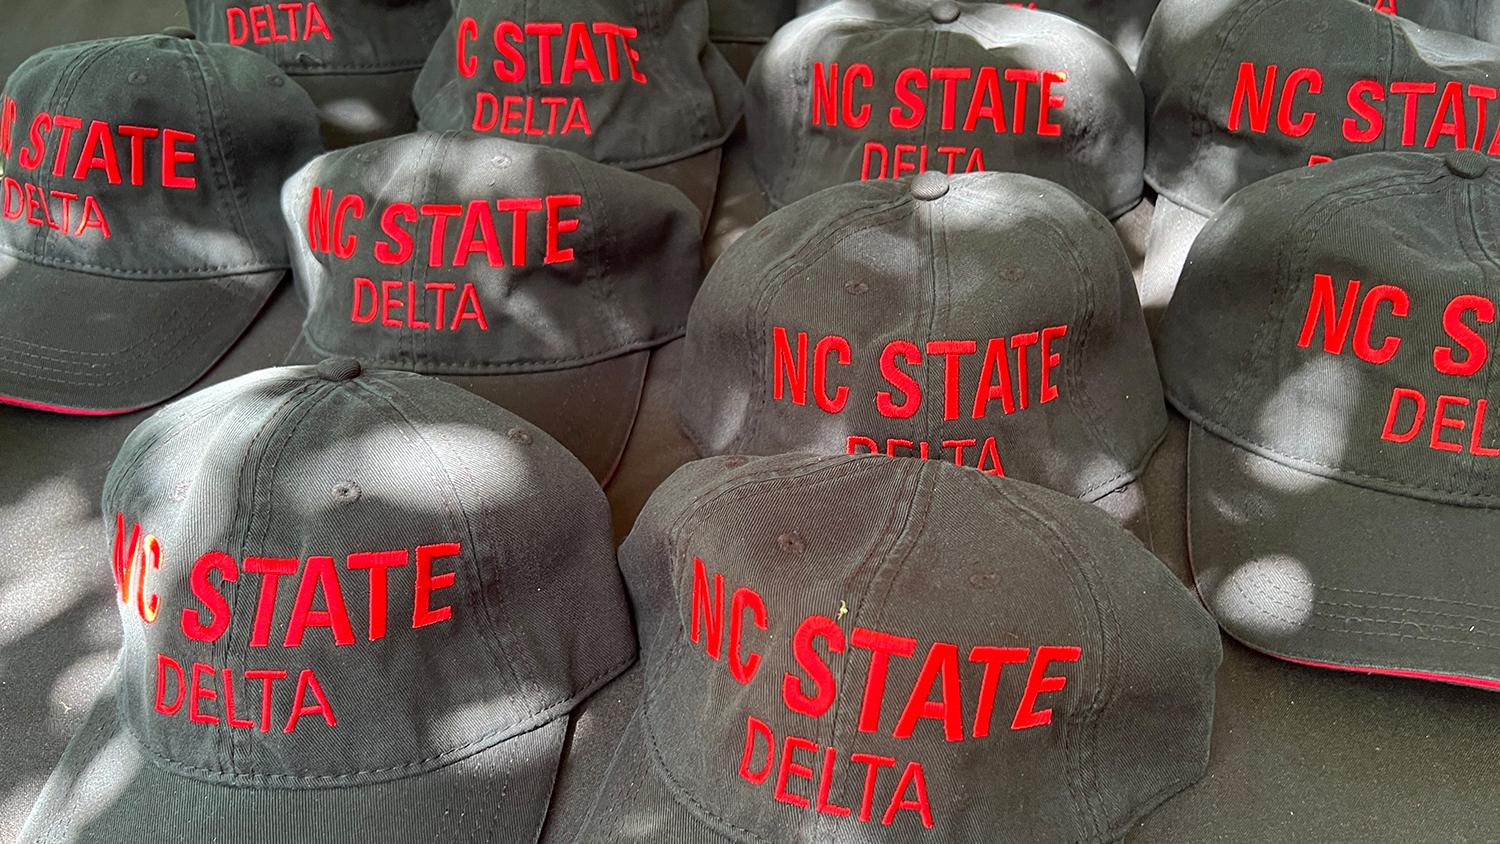 NC State DELTA ball caps on a table